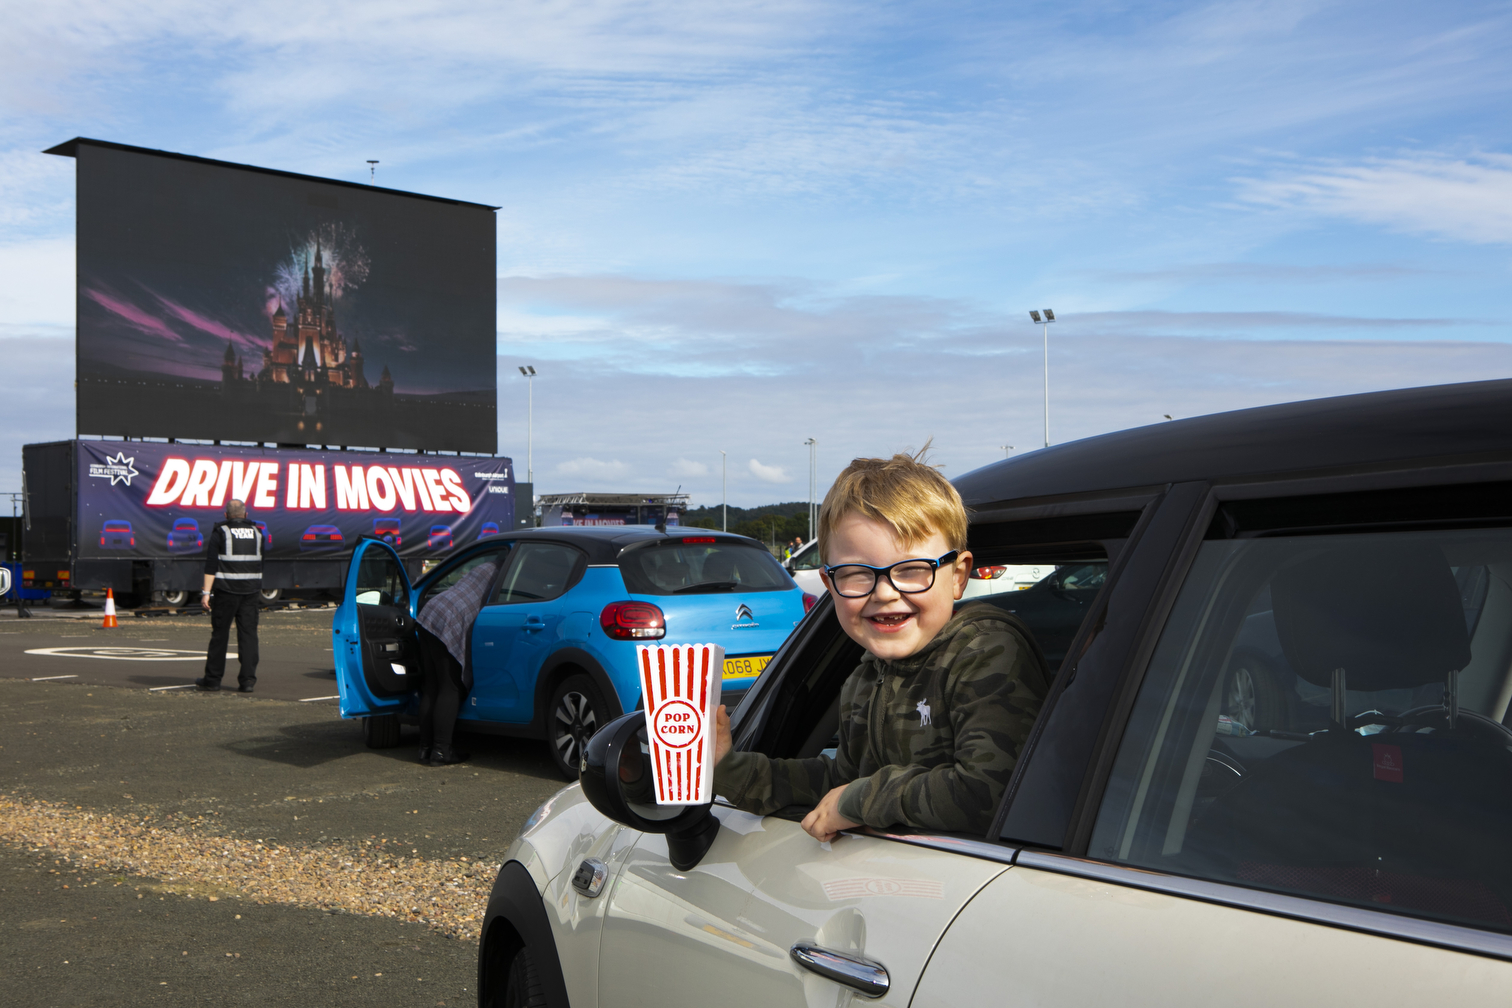 Drive-In Movies Off To A Flyer!